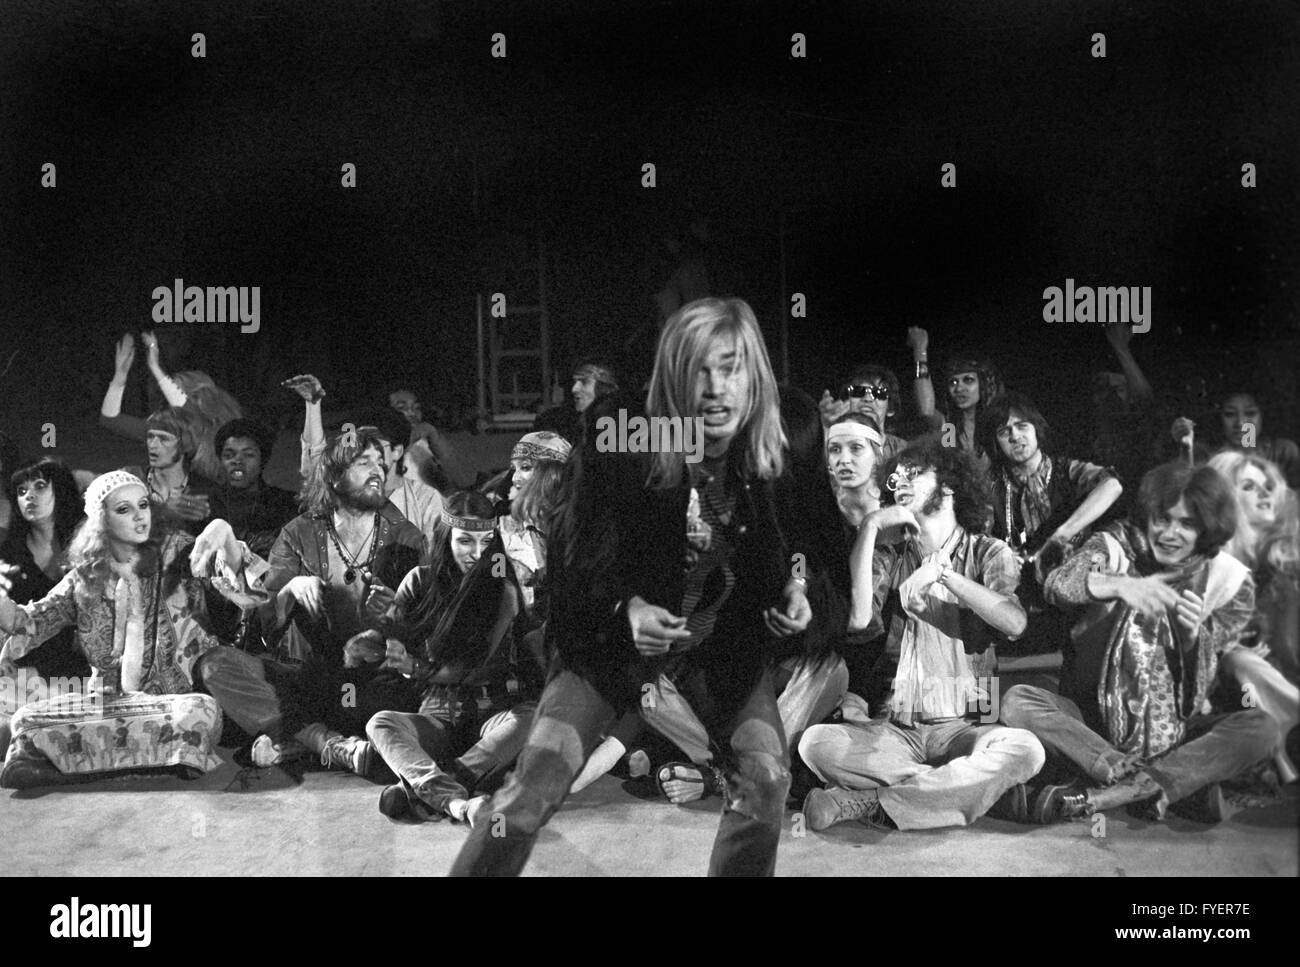 General rehearsal for the musical 'Hair' in the Musical Theatre at Ku'damm in berlin. The theatre will be opened with the US success musical on 04 October 1969. Stock Photo